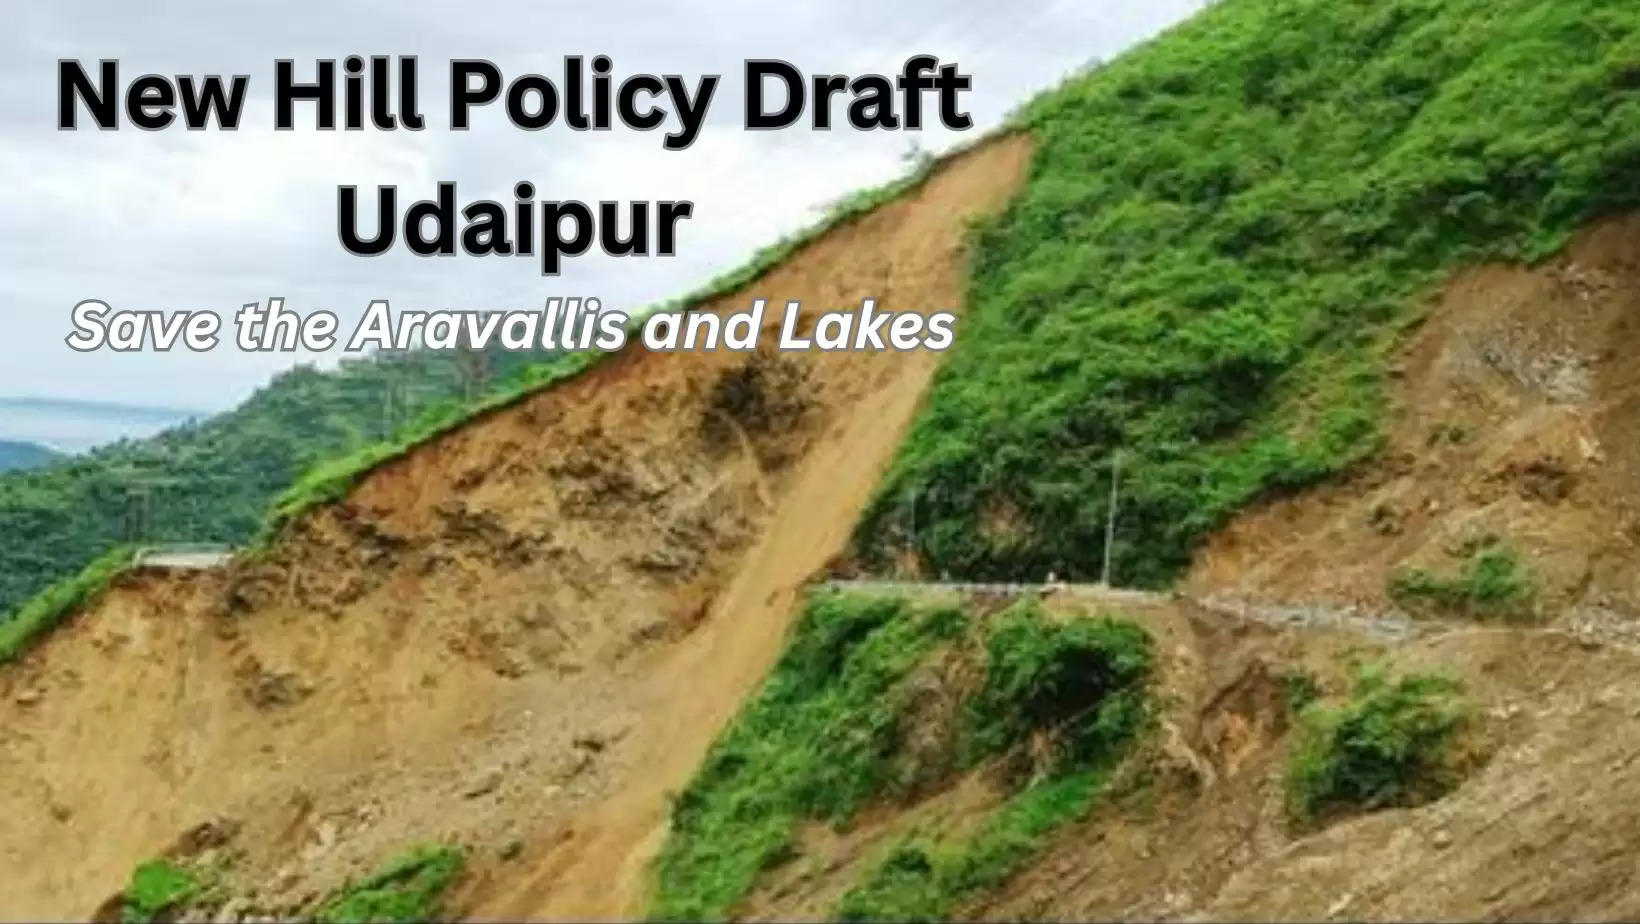 Save Aravallis New Hills Policy will aim to halt land conversion of hills for hotels and resorts in the cachement areas around udaipur